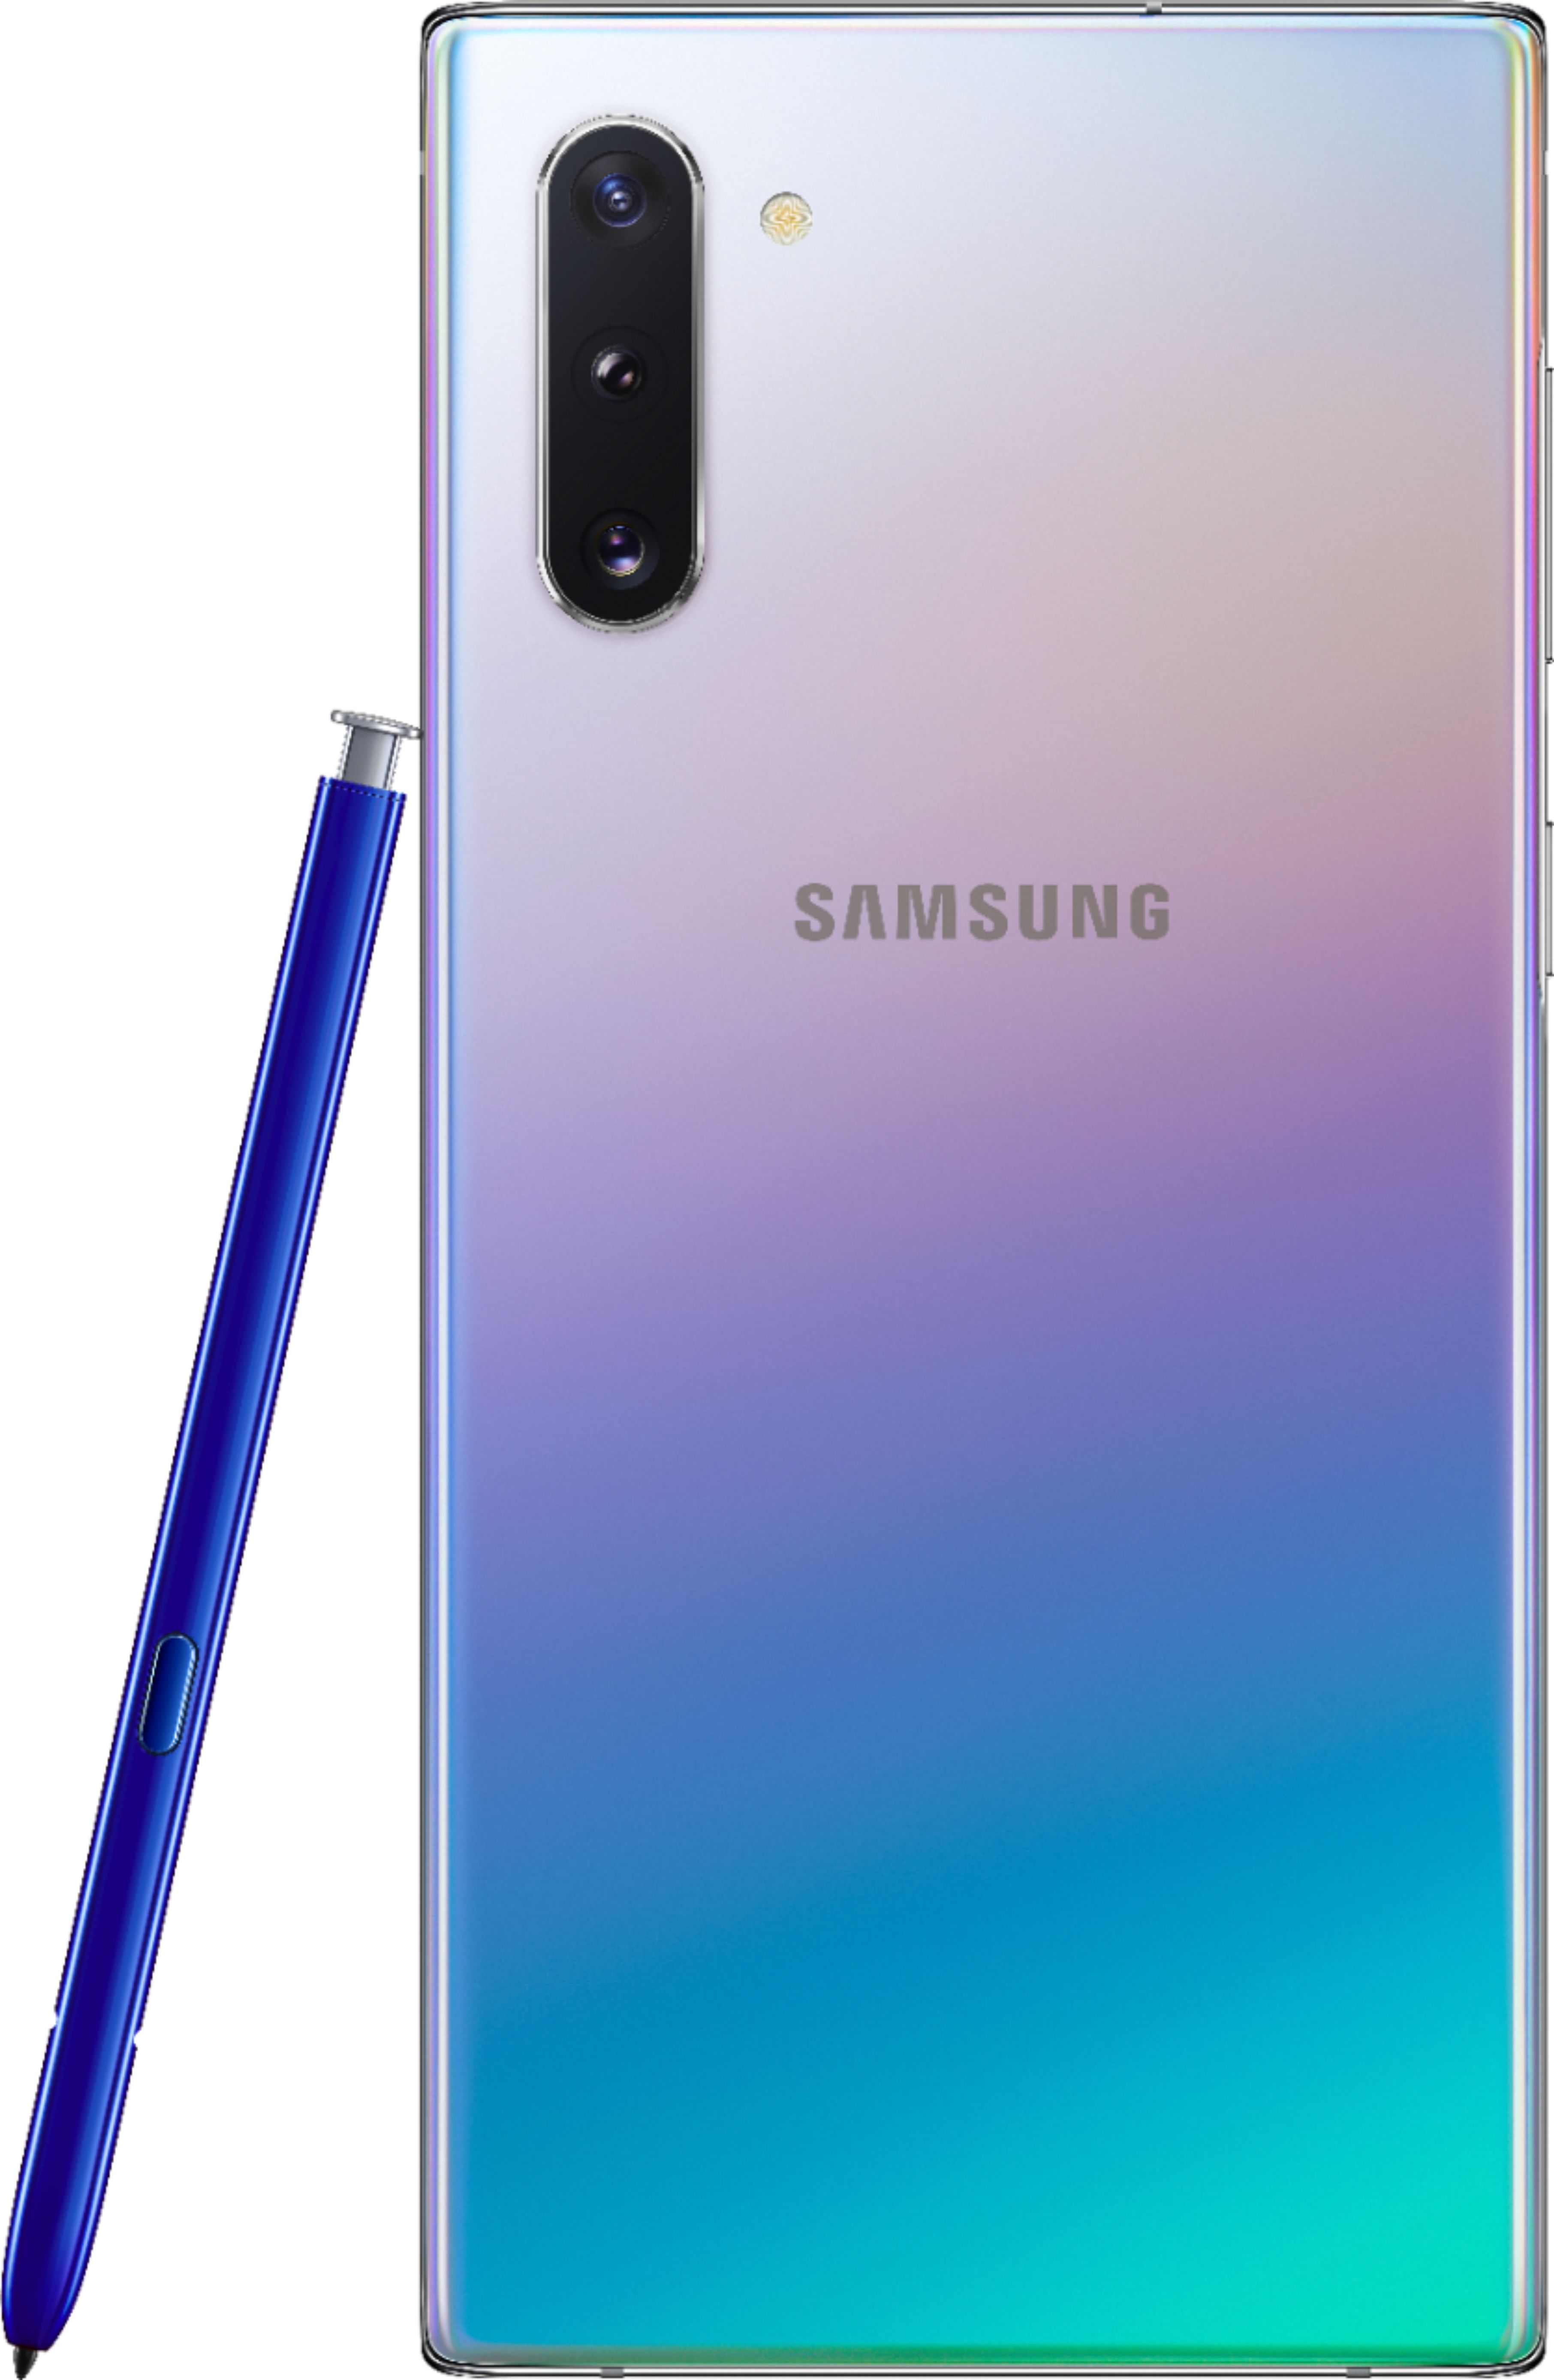 Samsung Galaxy Note10 5G pictures, official photos